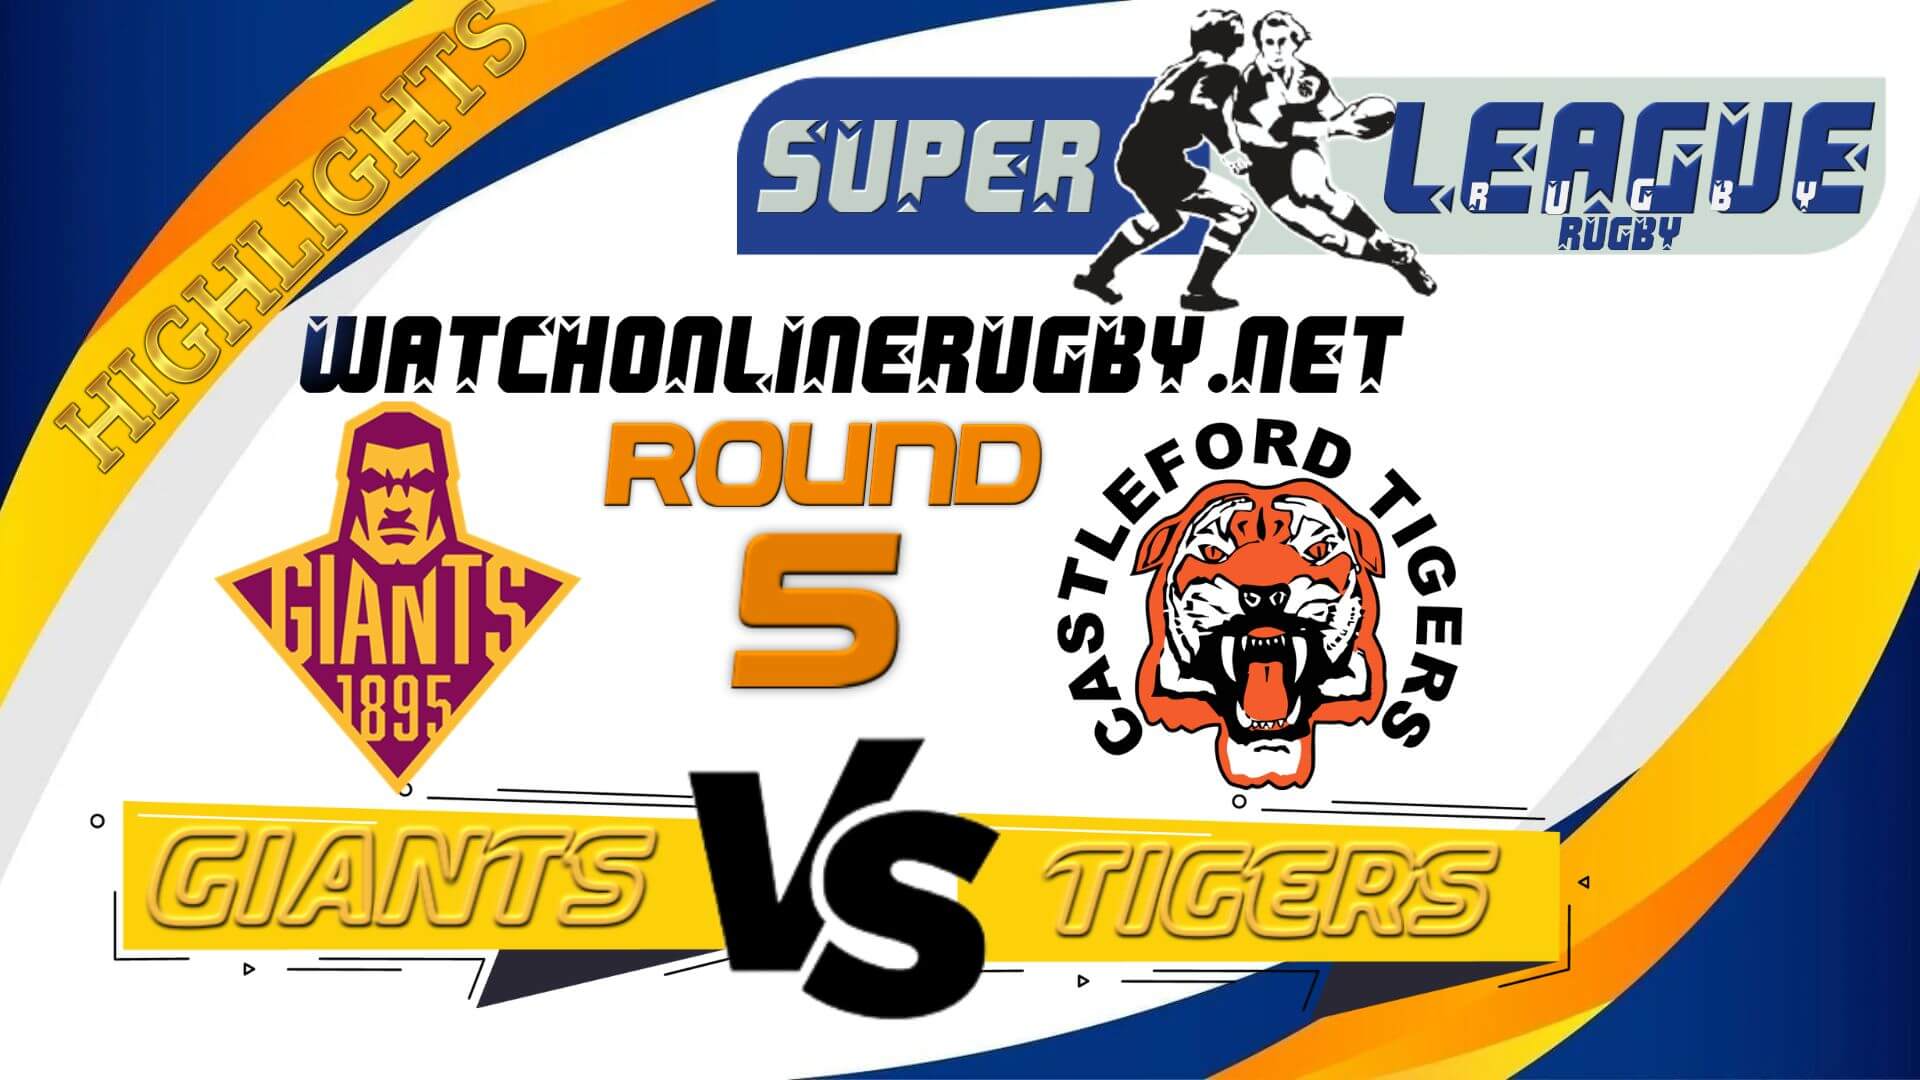 Huddersfield Giants Vs Castleford Tigers Super League Rugby 2022 RD 5